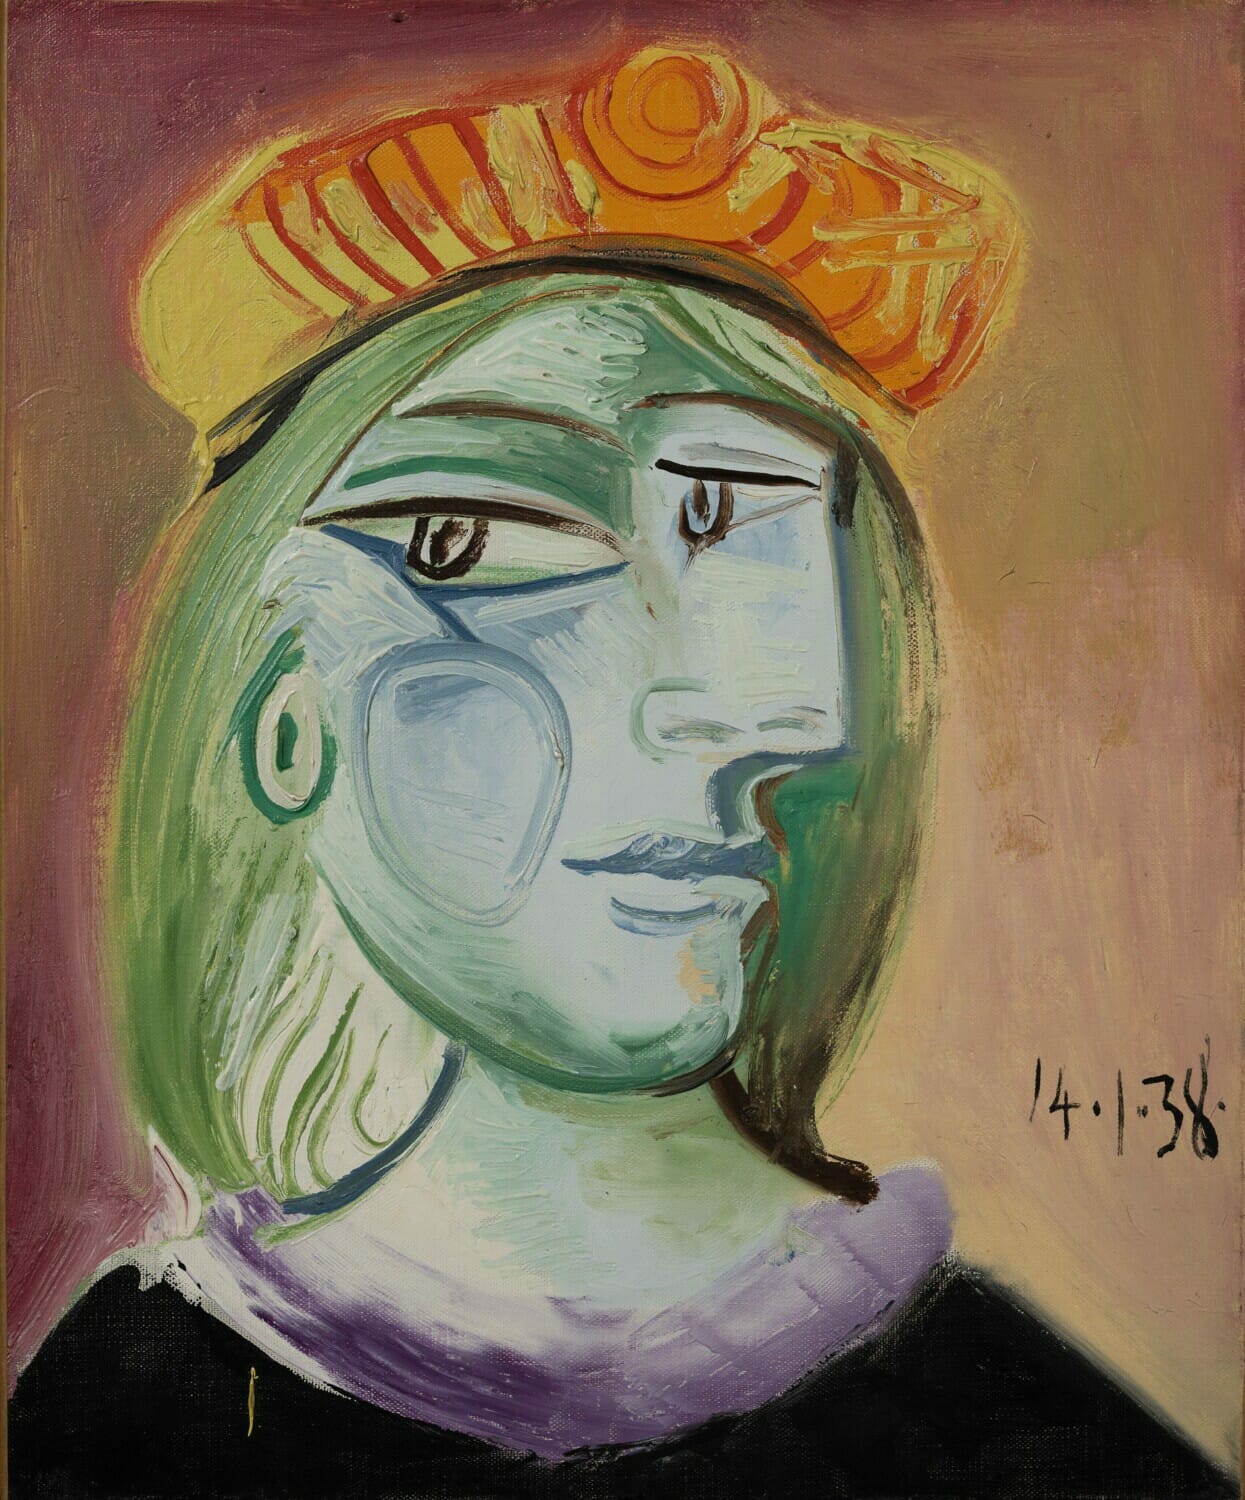 Pablo Picasso  Femme au béret rouge-orange  Painted January 14, 1938  Oil and ripolin on canvas  Estimate $20/30 million  © 2021 Estate of Pablo Picasso / Artists Rights Society (ARS), New York